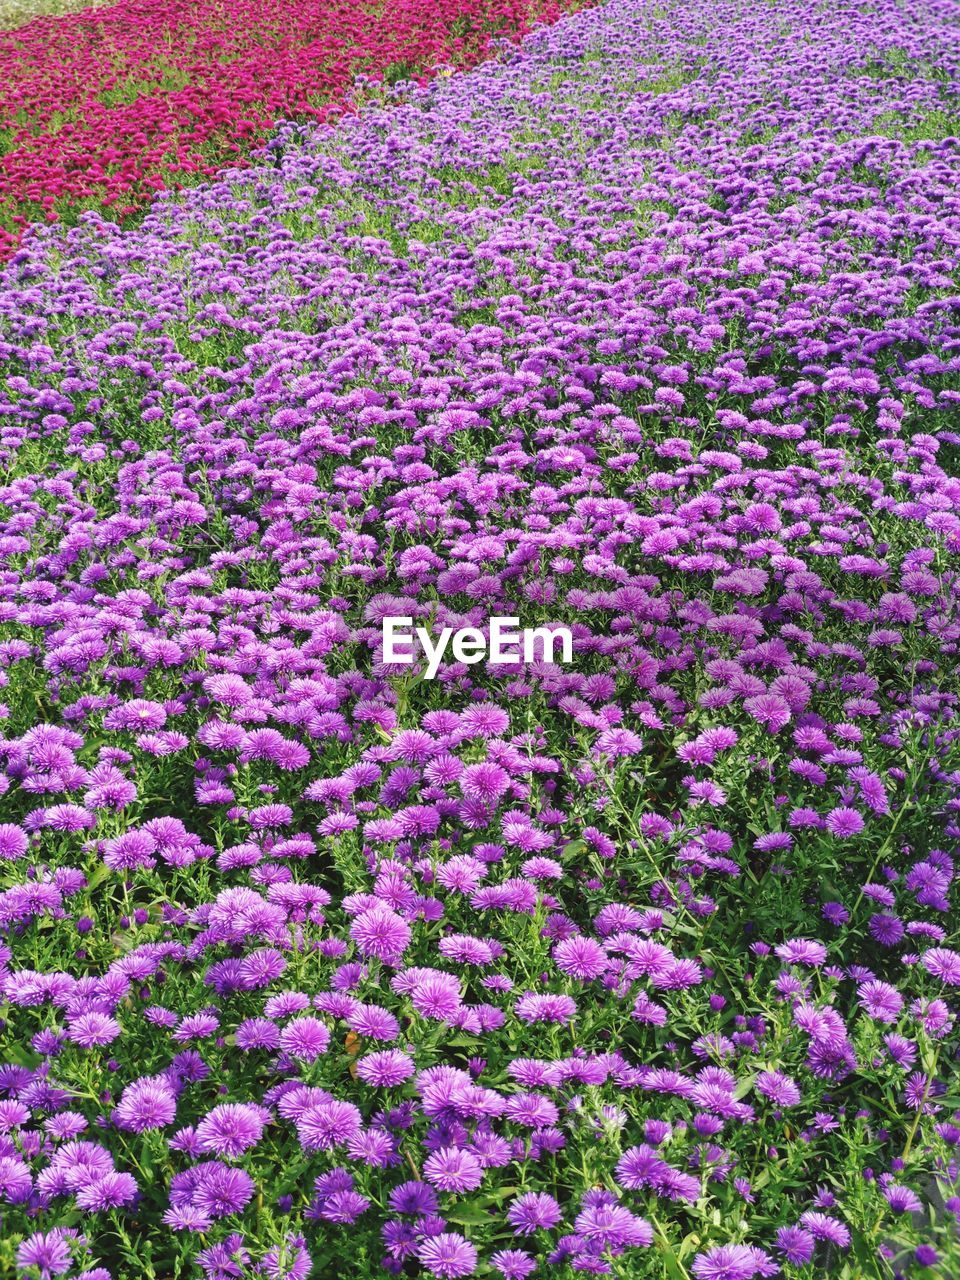 plant, flower, flowering plant, beauty in nature, growth, freshness, fragility, field, nature, land, no people, day, full frame, purple, abundance, pink, high angle view, springtime, tranquility, backgrounds, flowerbed, outdoors, wildflower, scenics - nature, botany, blossom, landscape, tranquil scene, meadow